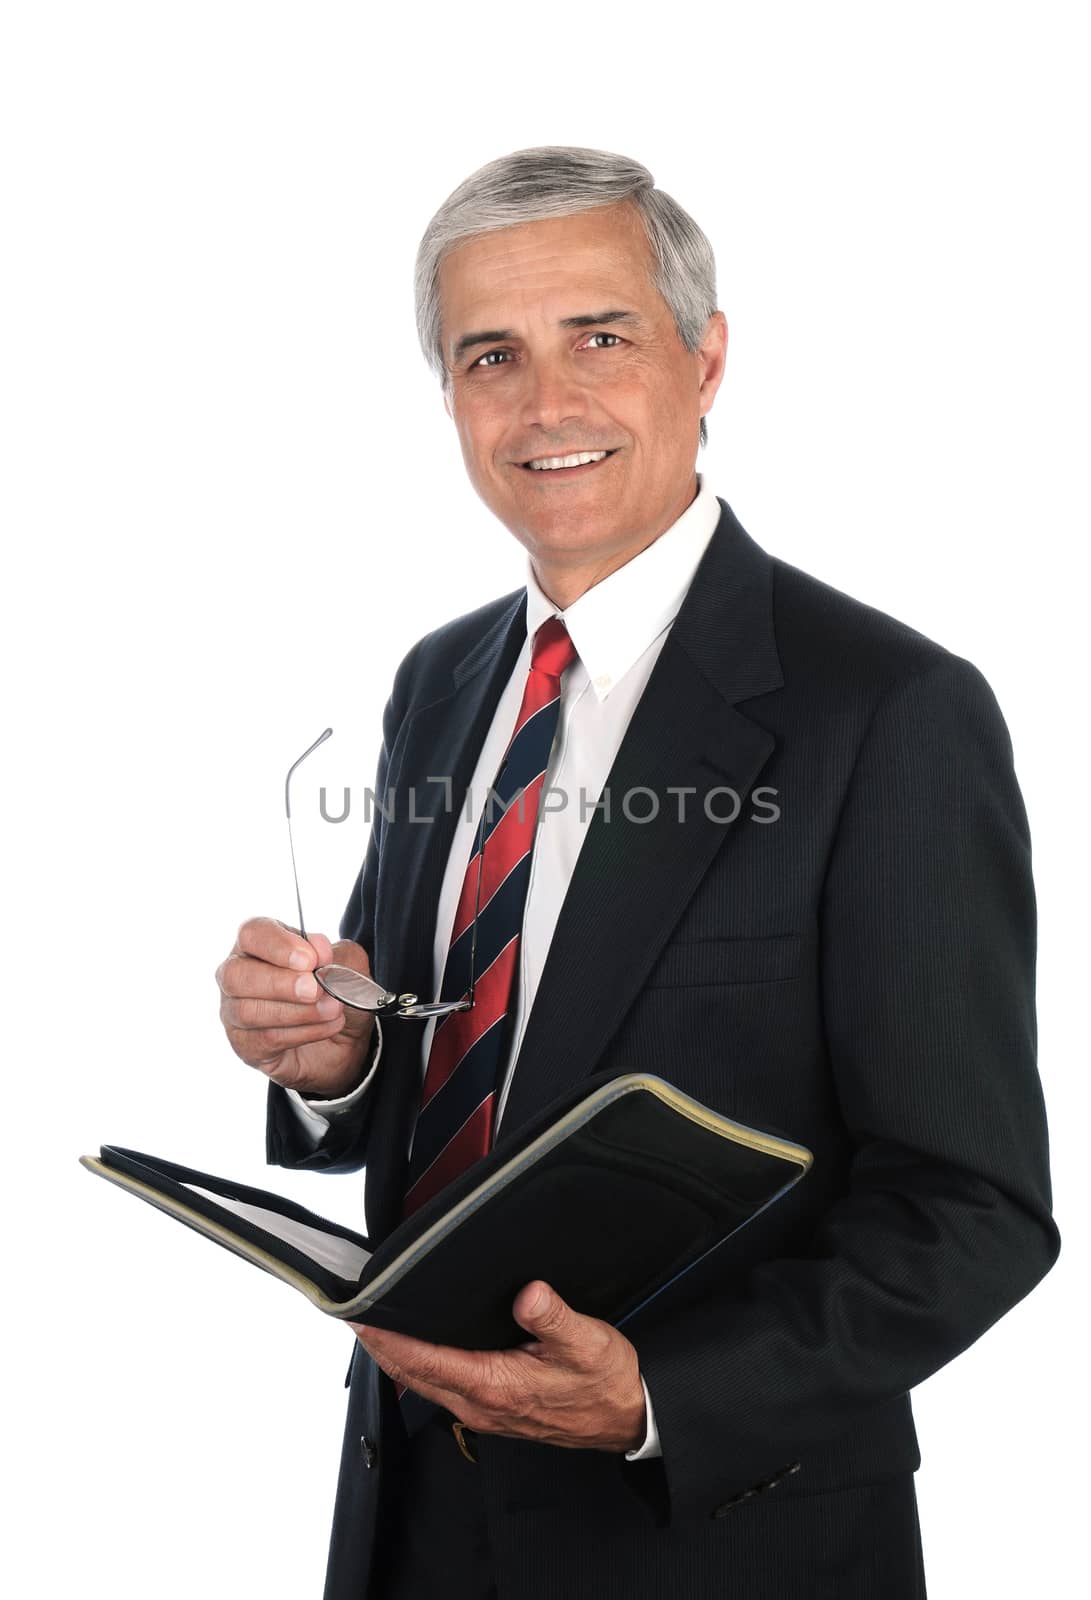 Smiling middle aged businessman holding a binder and his eye glasses while standing isolated on white.